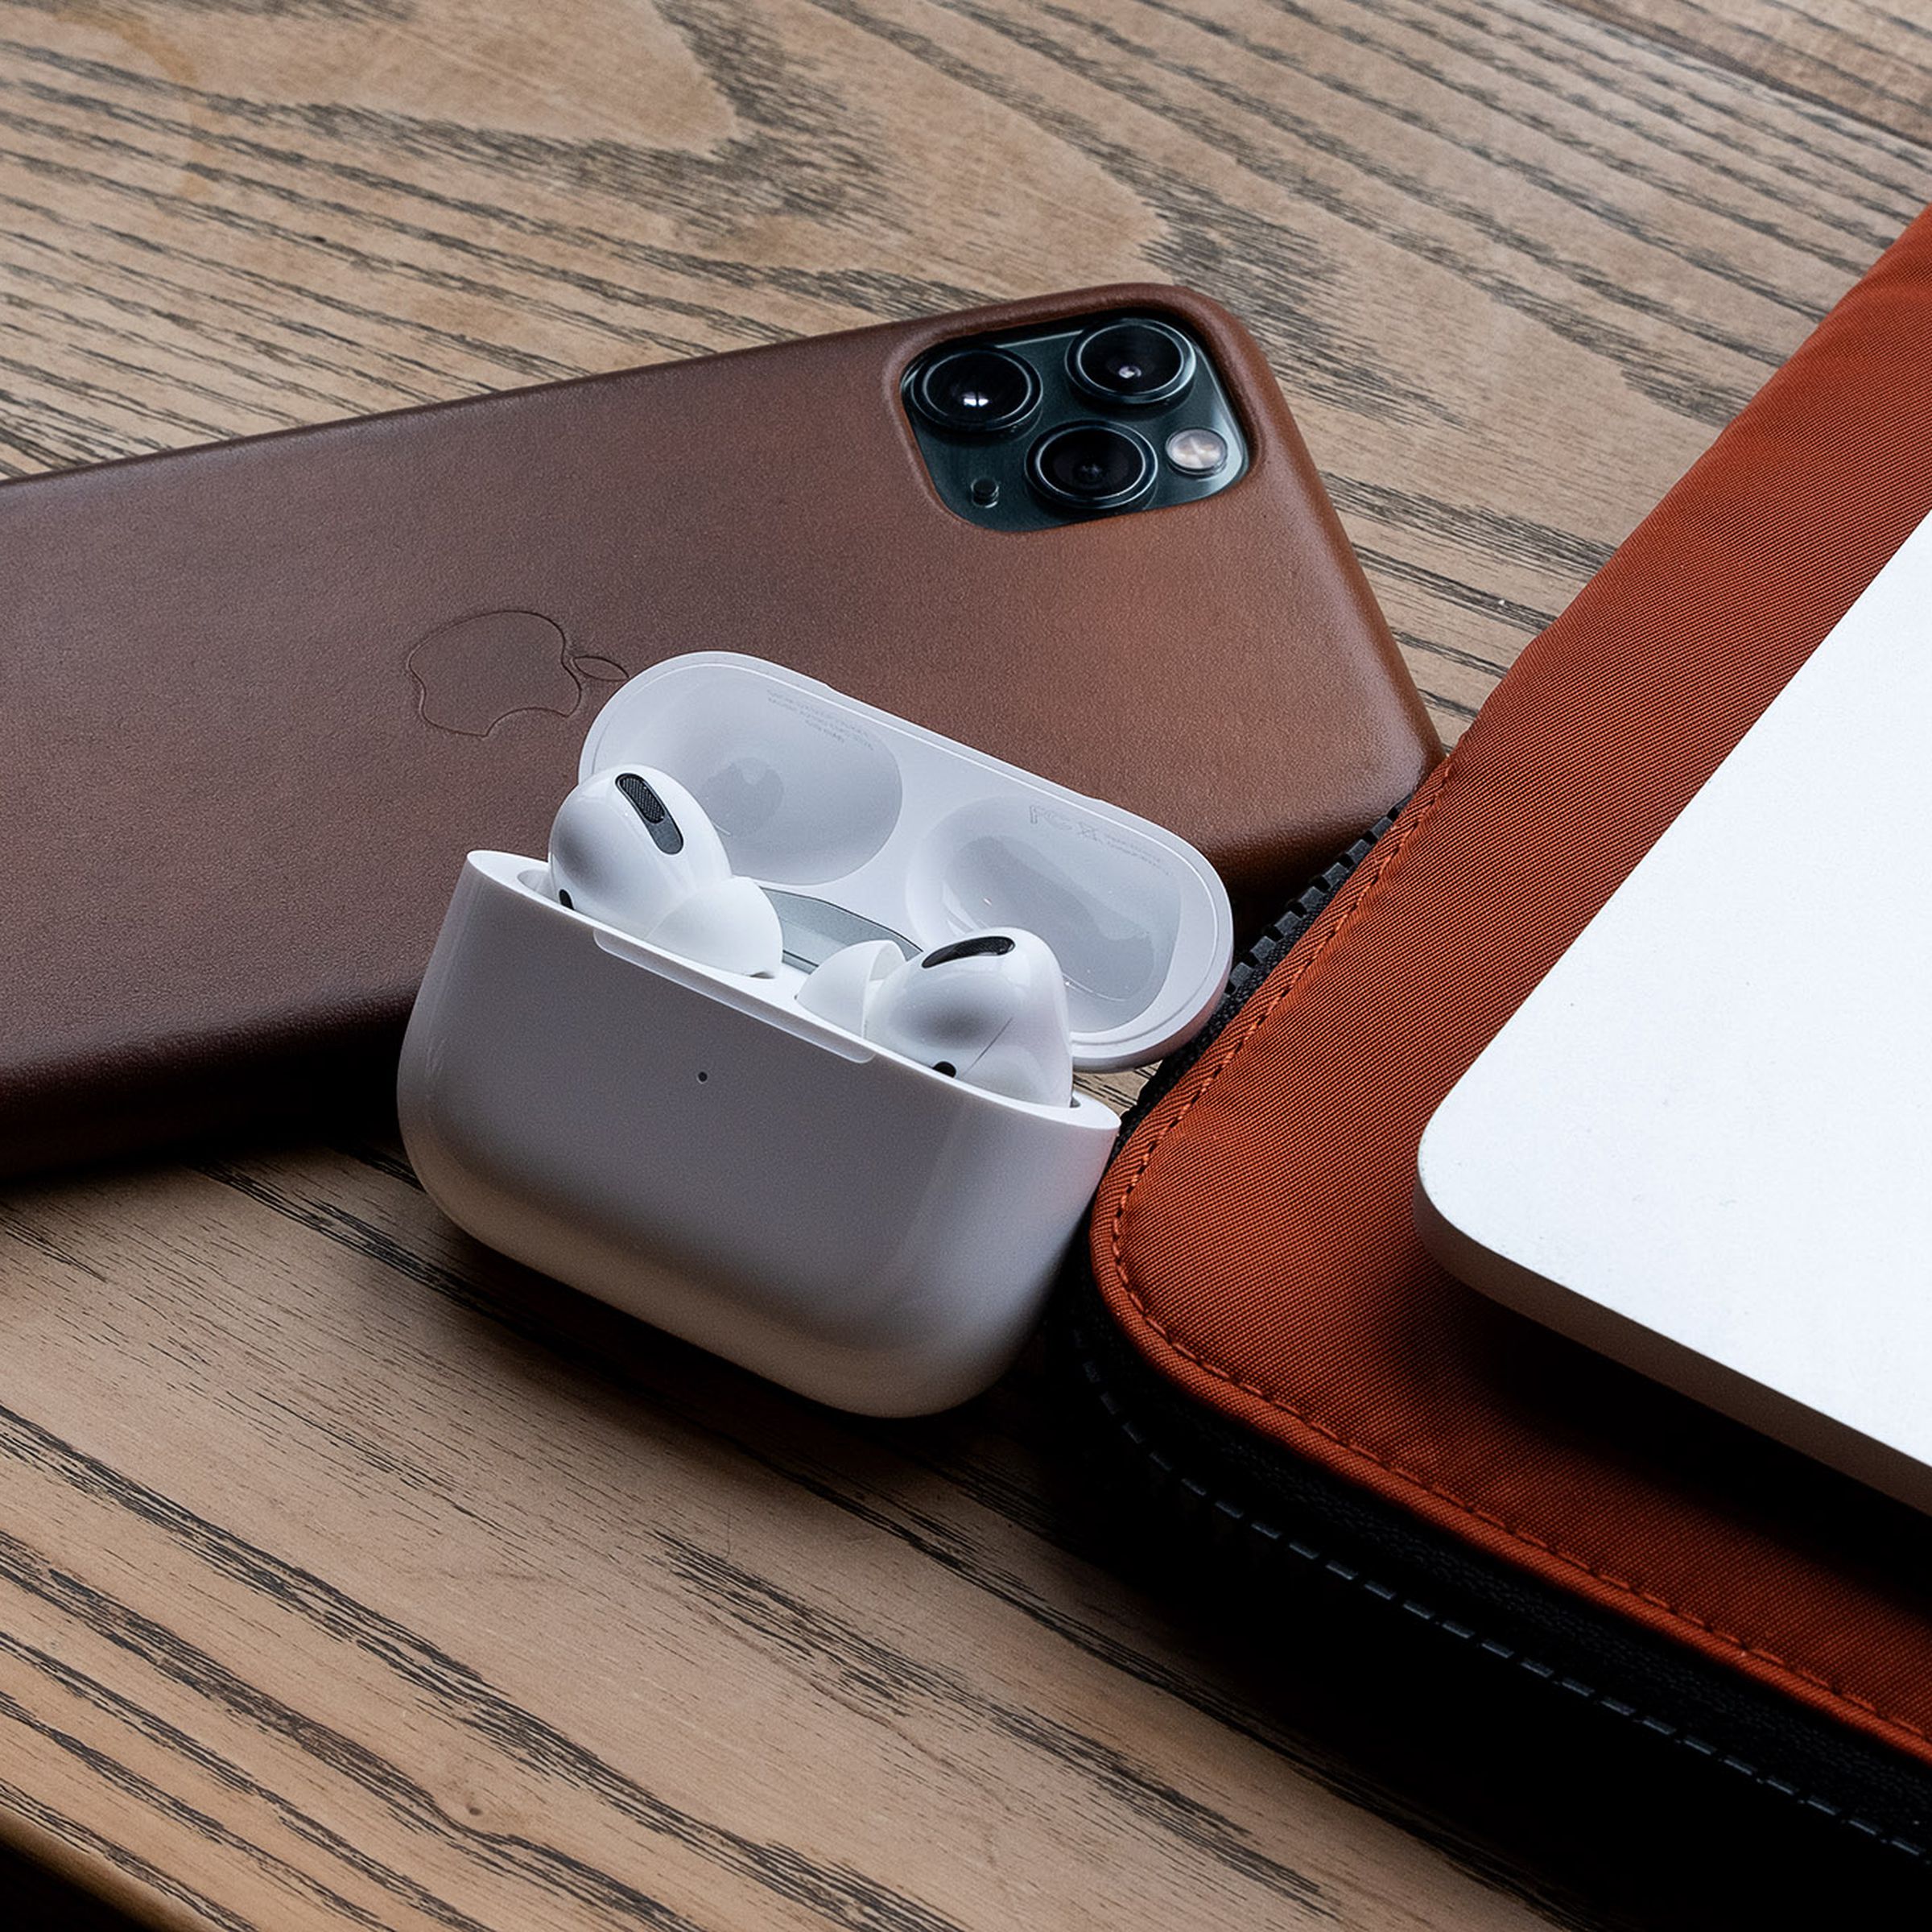 The last-gen AirPods Pro sitting on a desk near an iPhone and a MacBook.